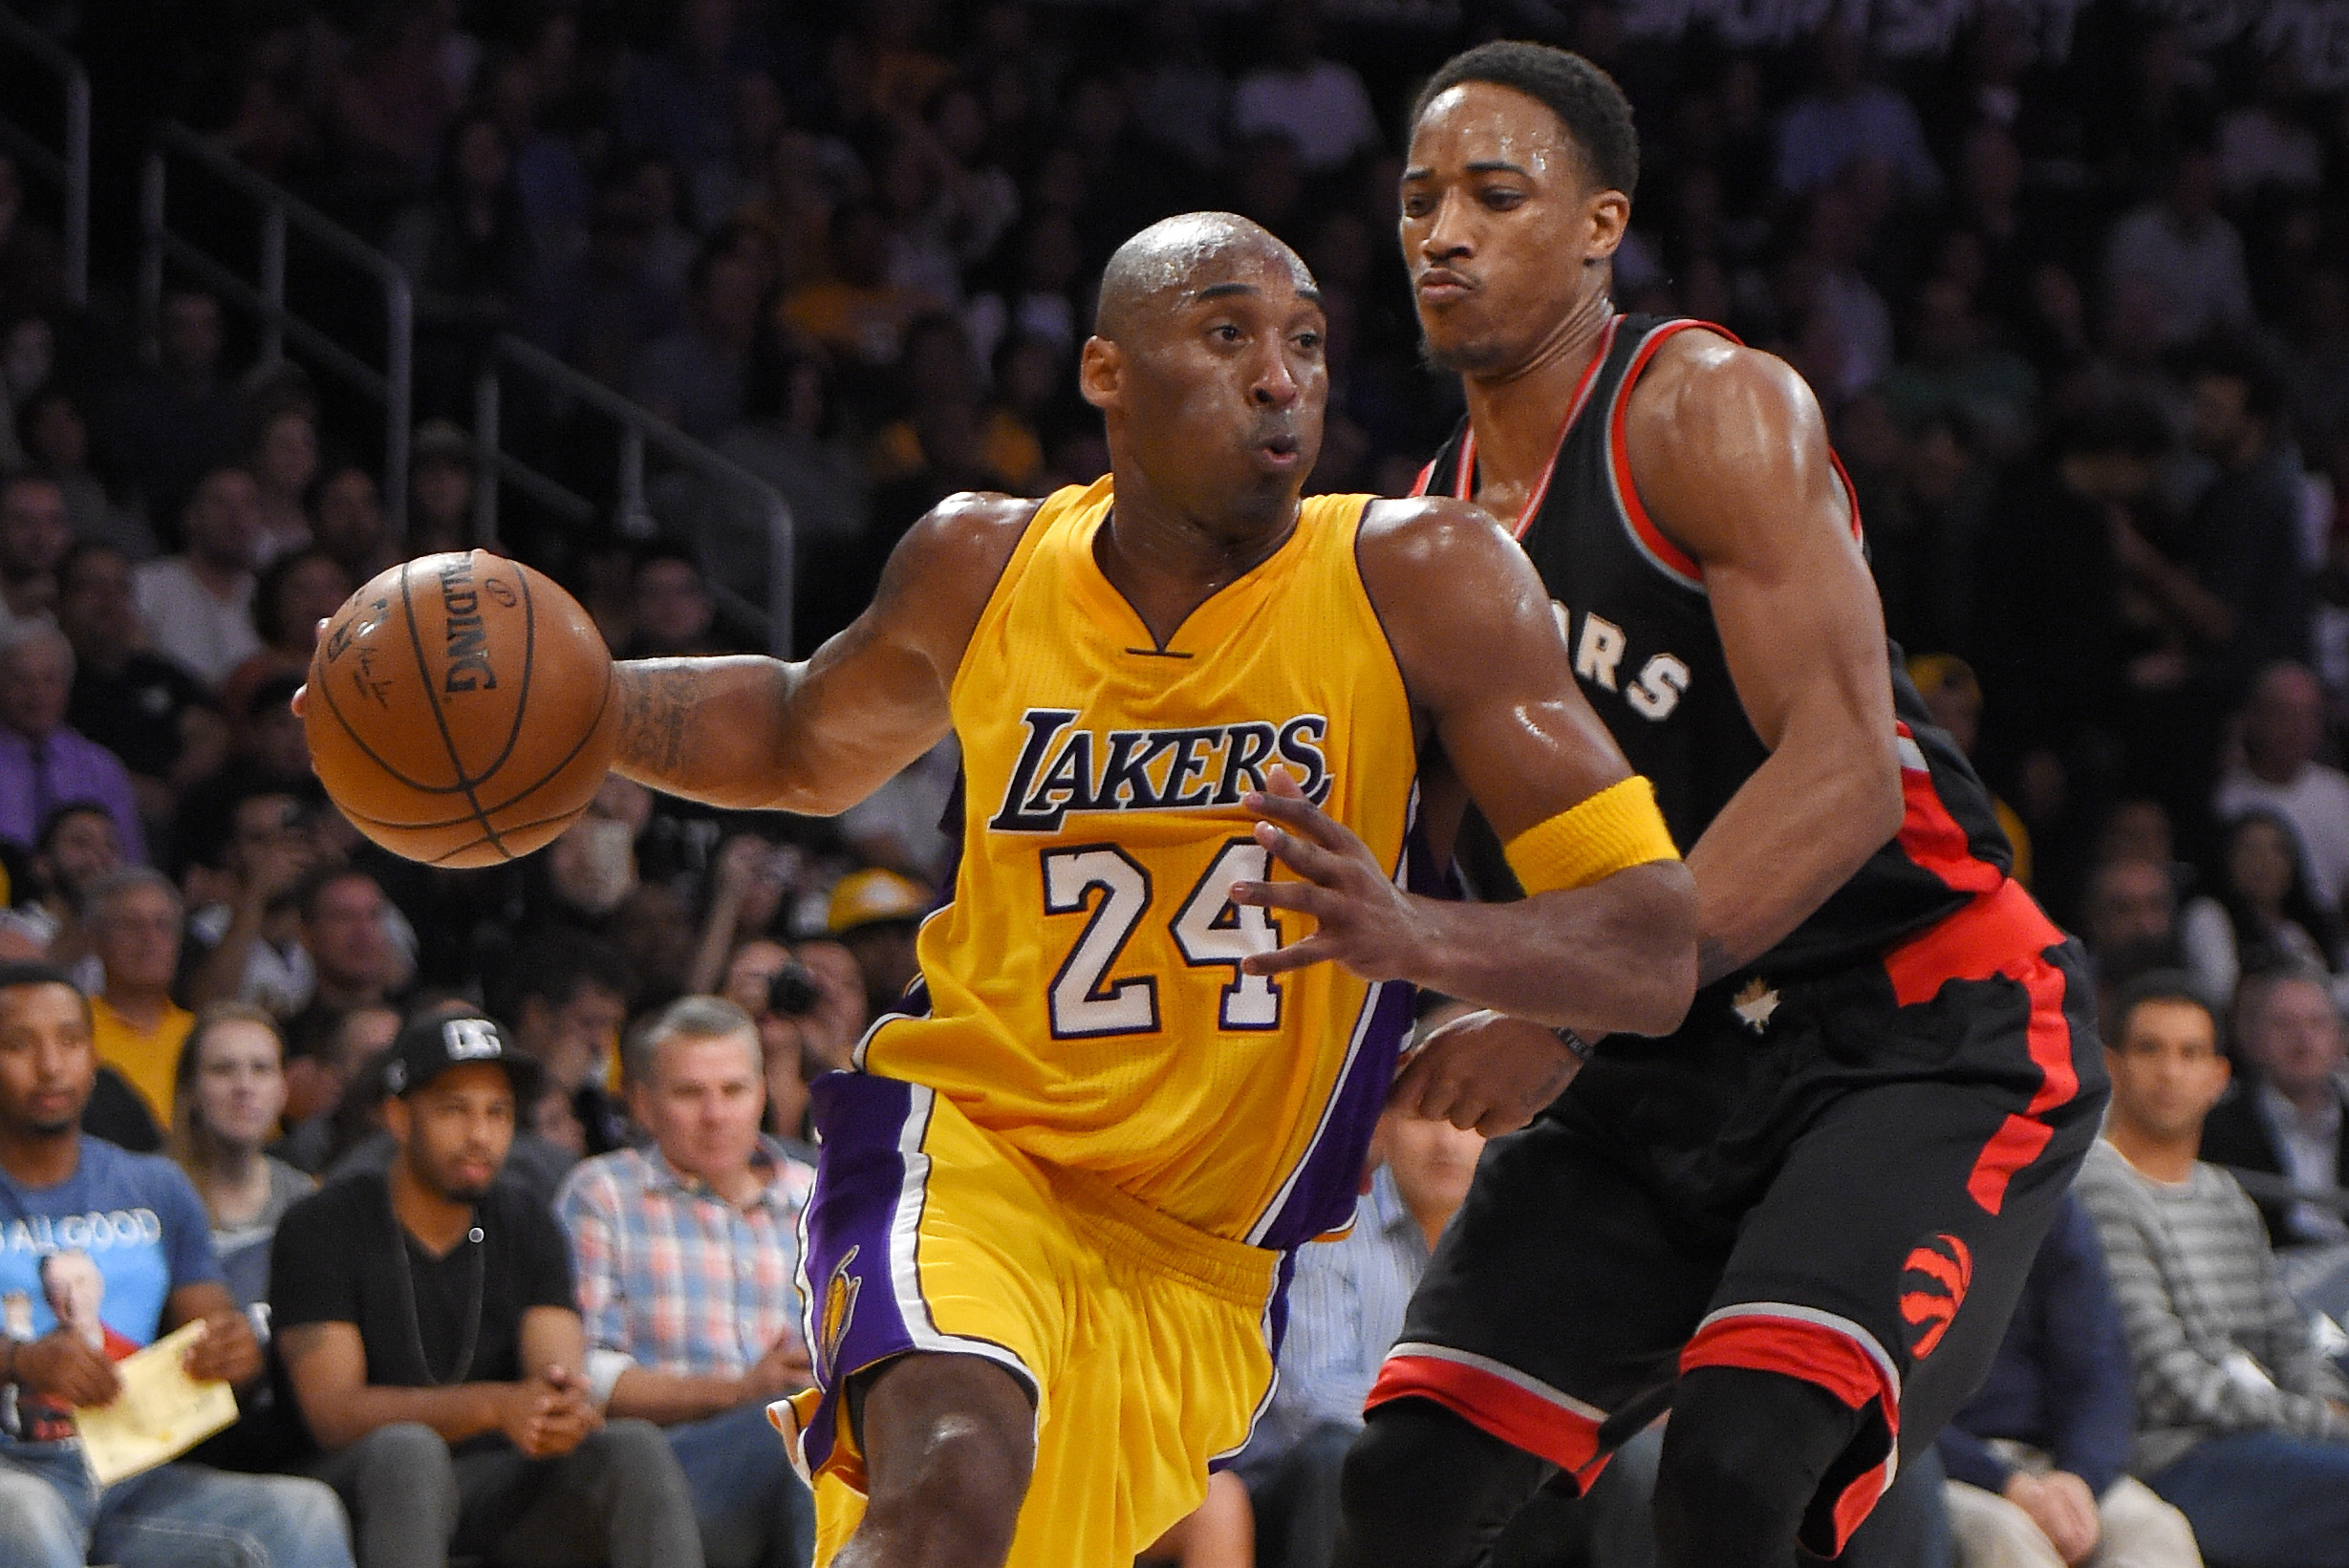 DeMar DeRozan got torched by Kobe for wearing Jordans against him -  Basketball Network - Your daily dose of basketball